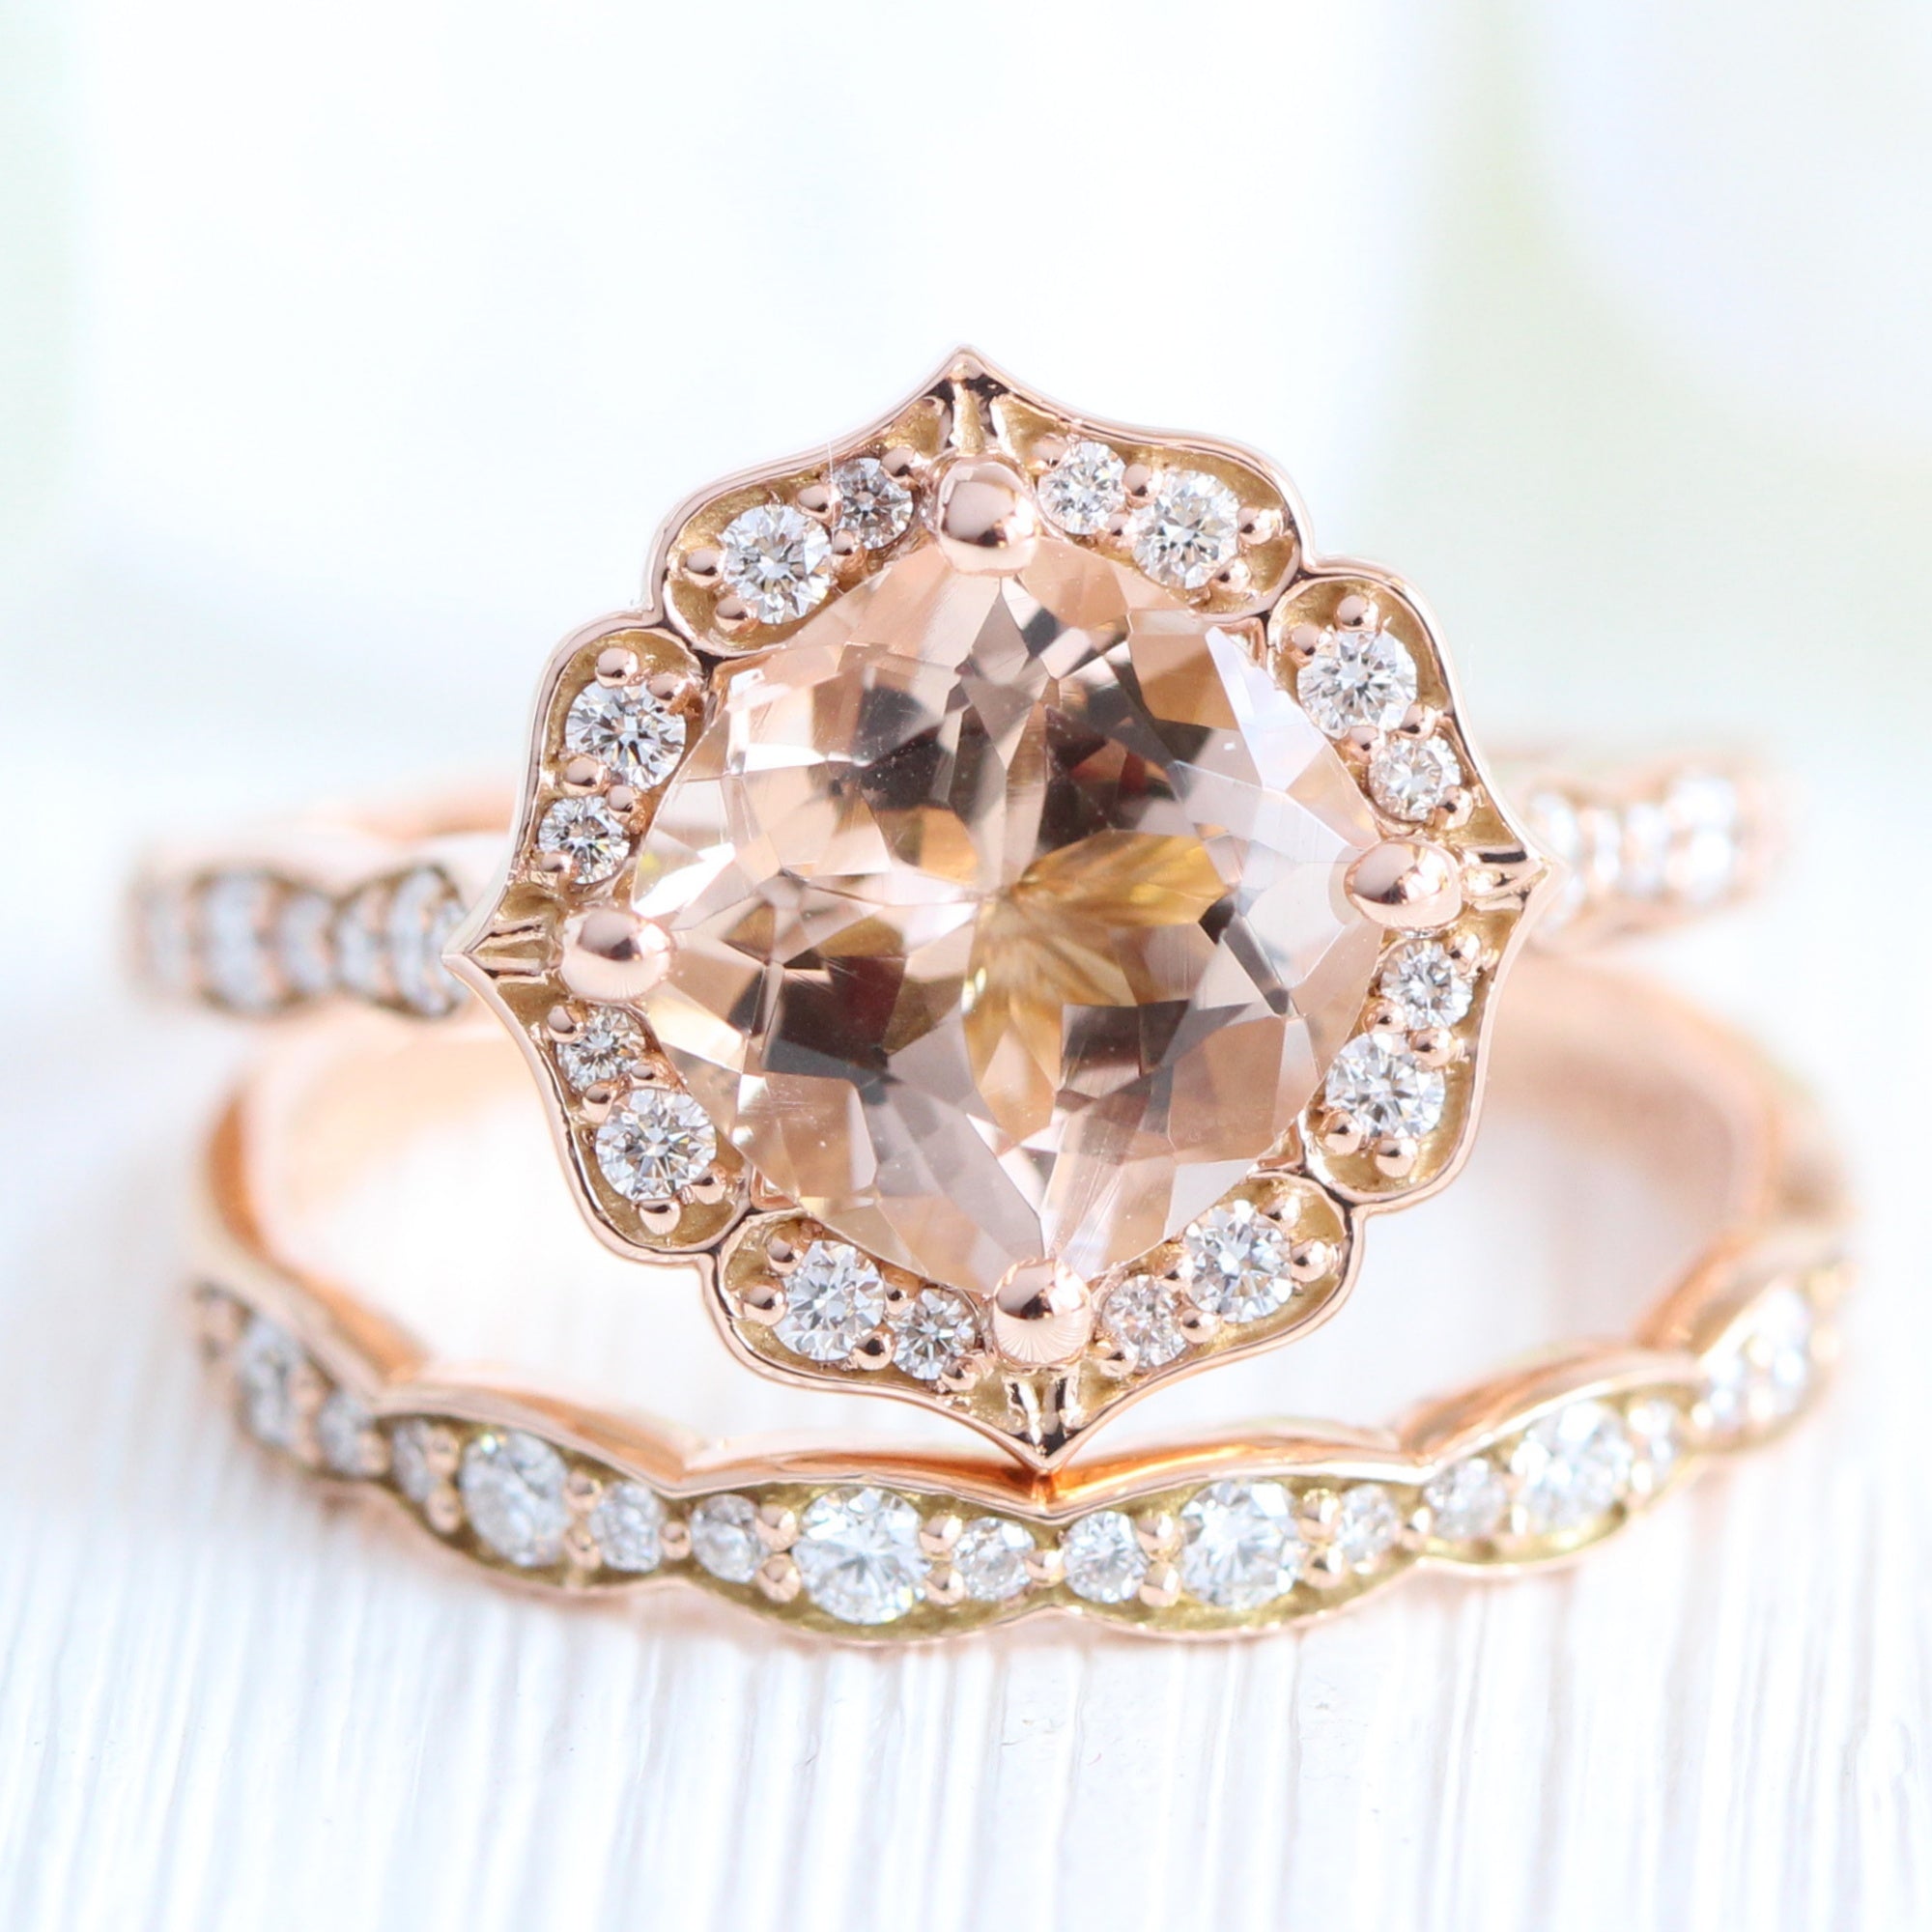 Vintage Floral Cushion Ring Set w/ Large Morganite and Scalloped Diamond Band